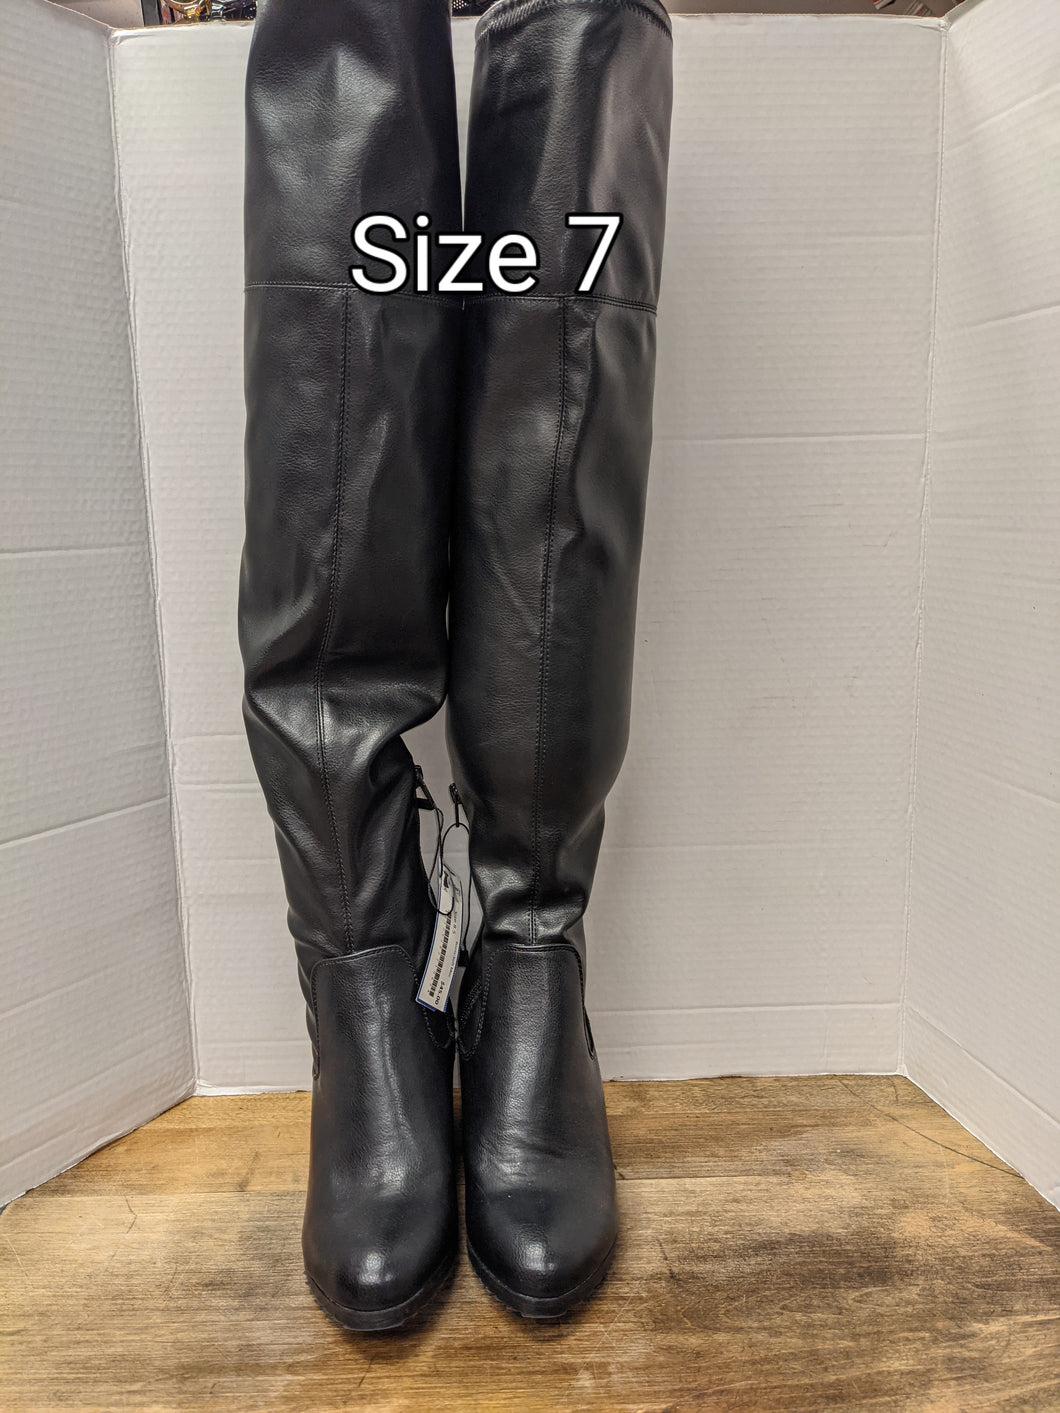 Boots - Size 8.5